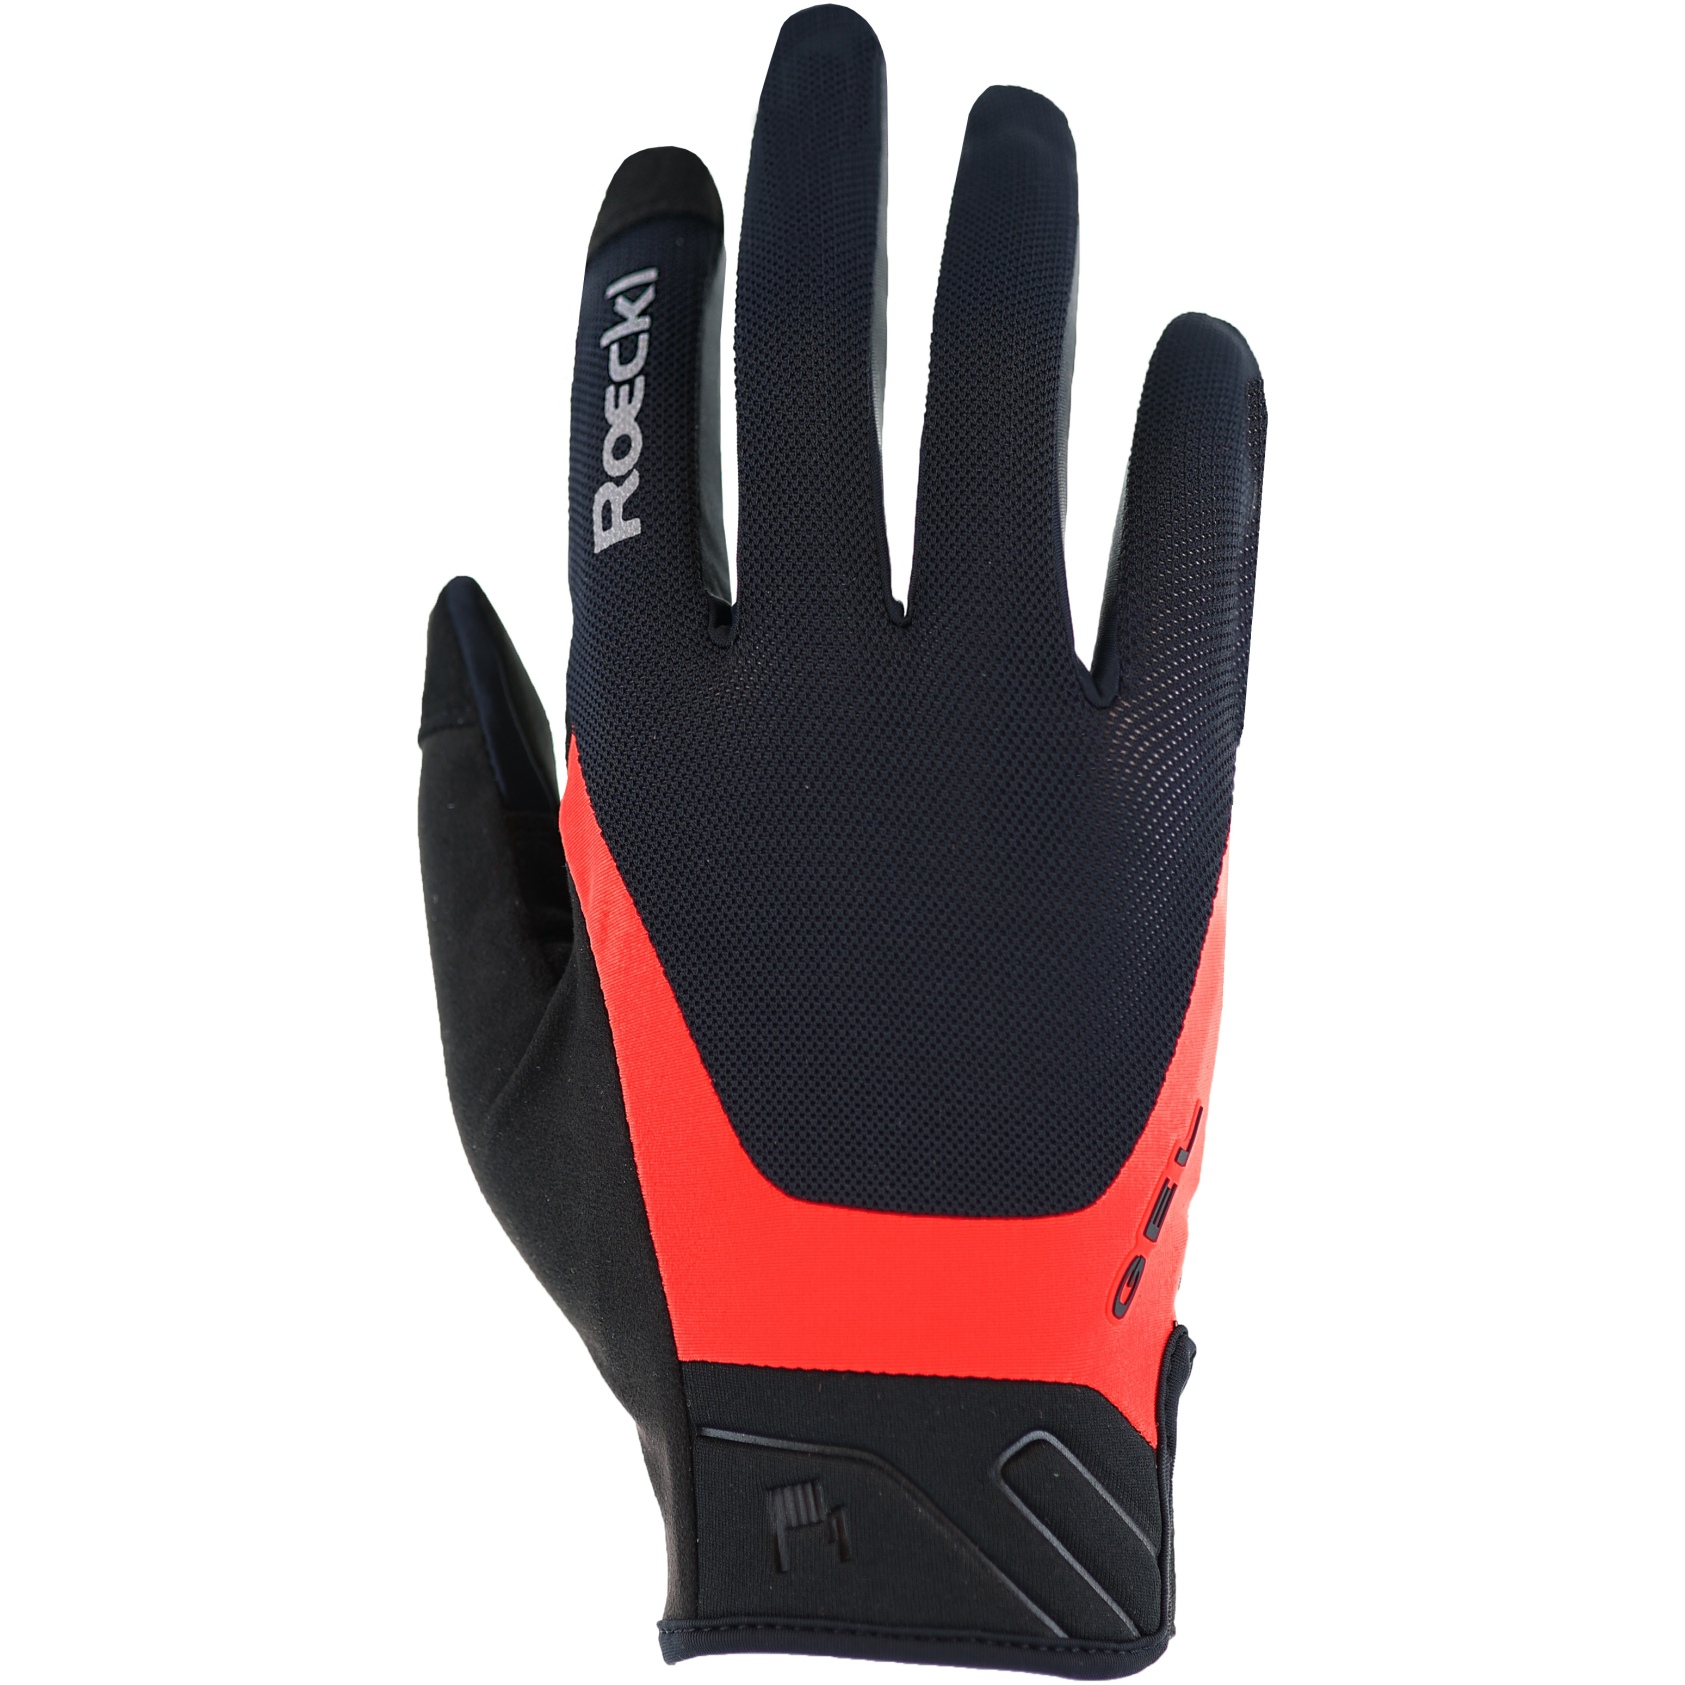 Picture of Roeckl Sports Mori 2 Cycling Gloves - black/bittersweet 9302